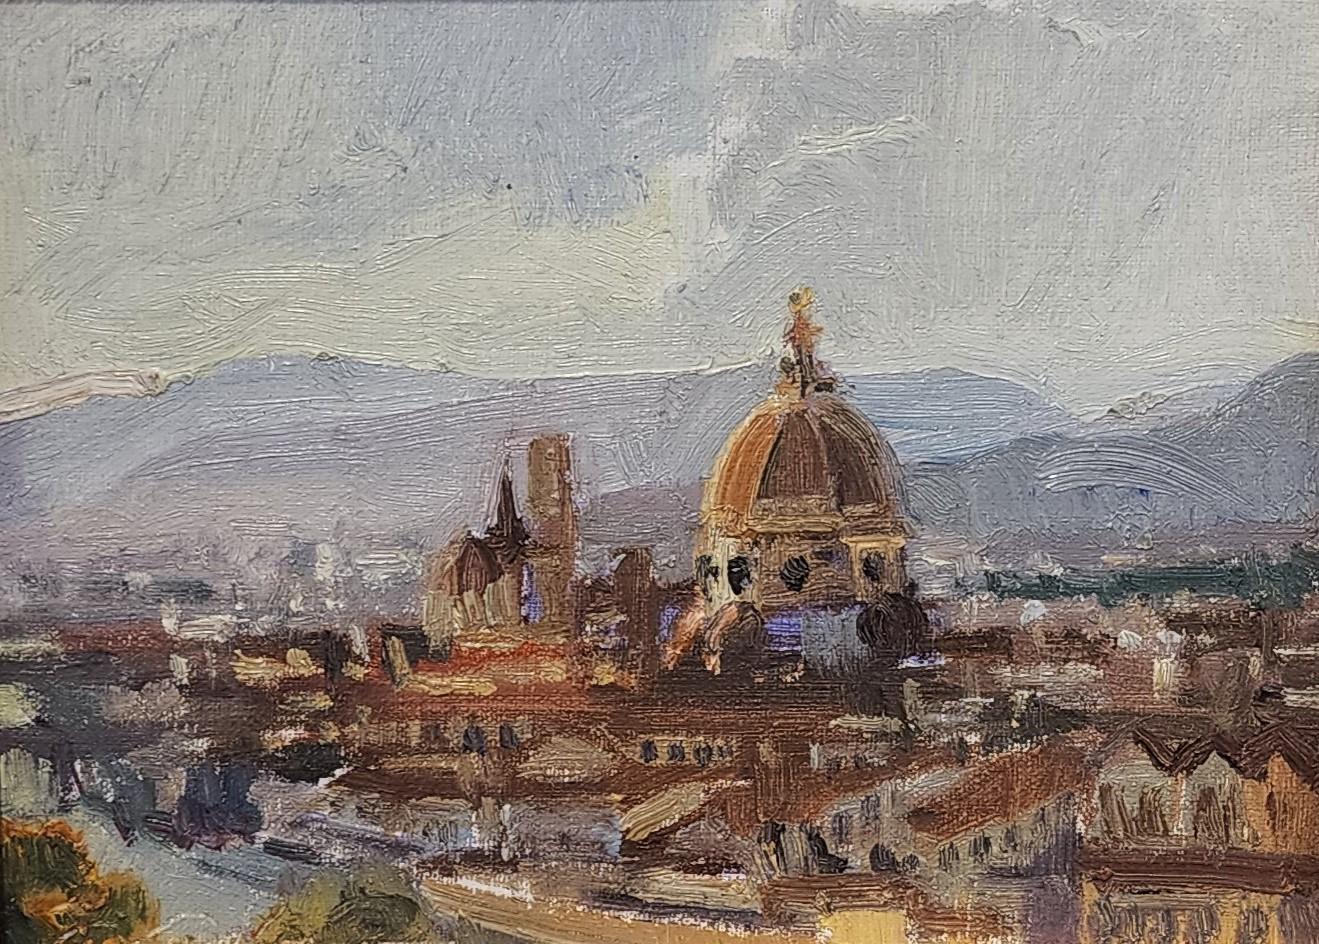 Virginia Vaughan  Landscape Painting - Duomo at Sunset, Impressionism , Landscape, Framed, Plein Aire, Italy, Oil